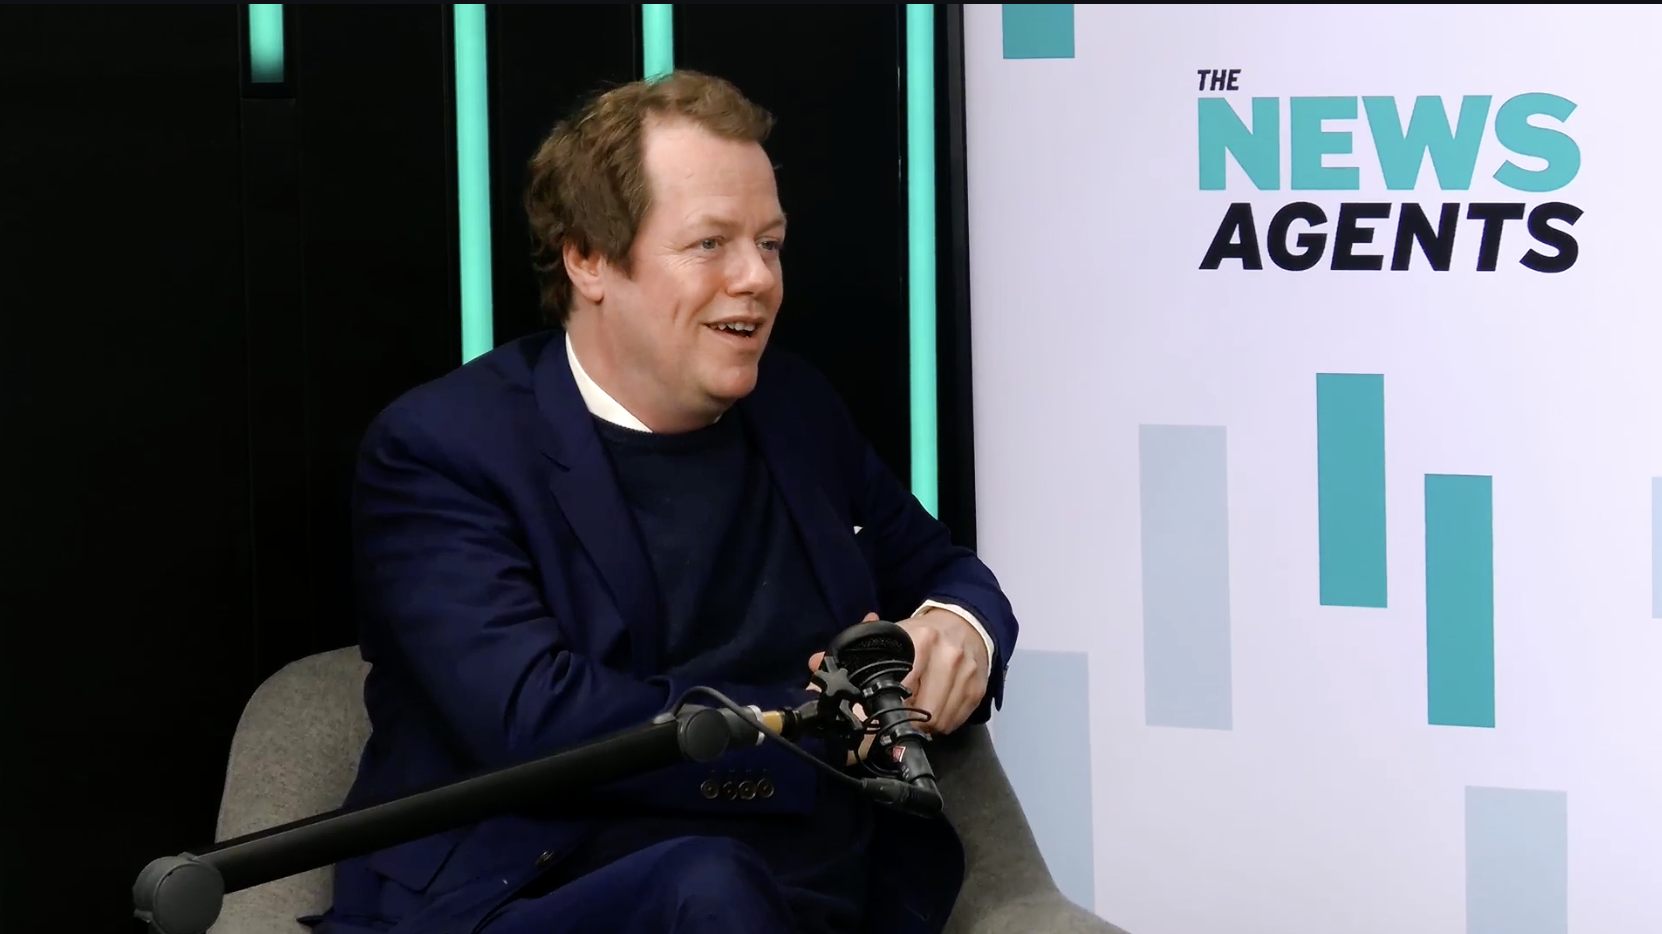 Tom Parker Bowles appeared on The News Agents podcast 